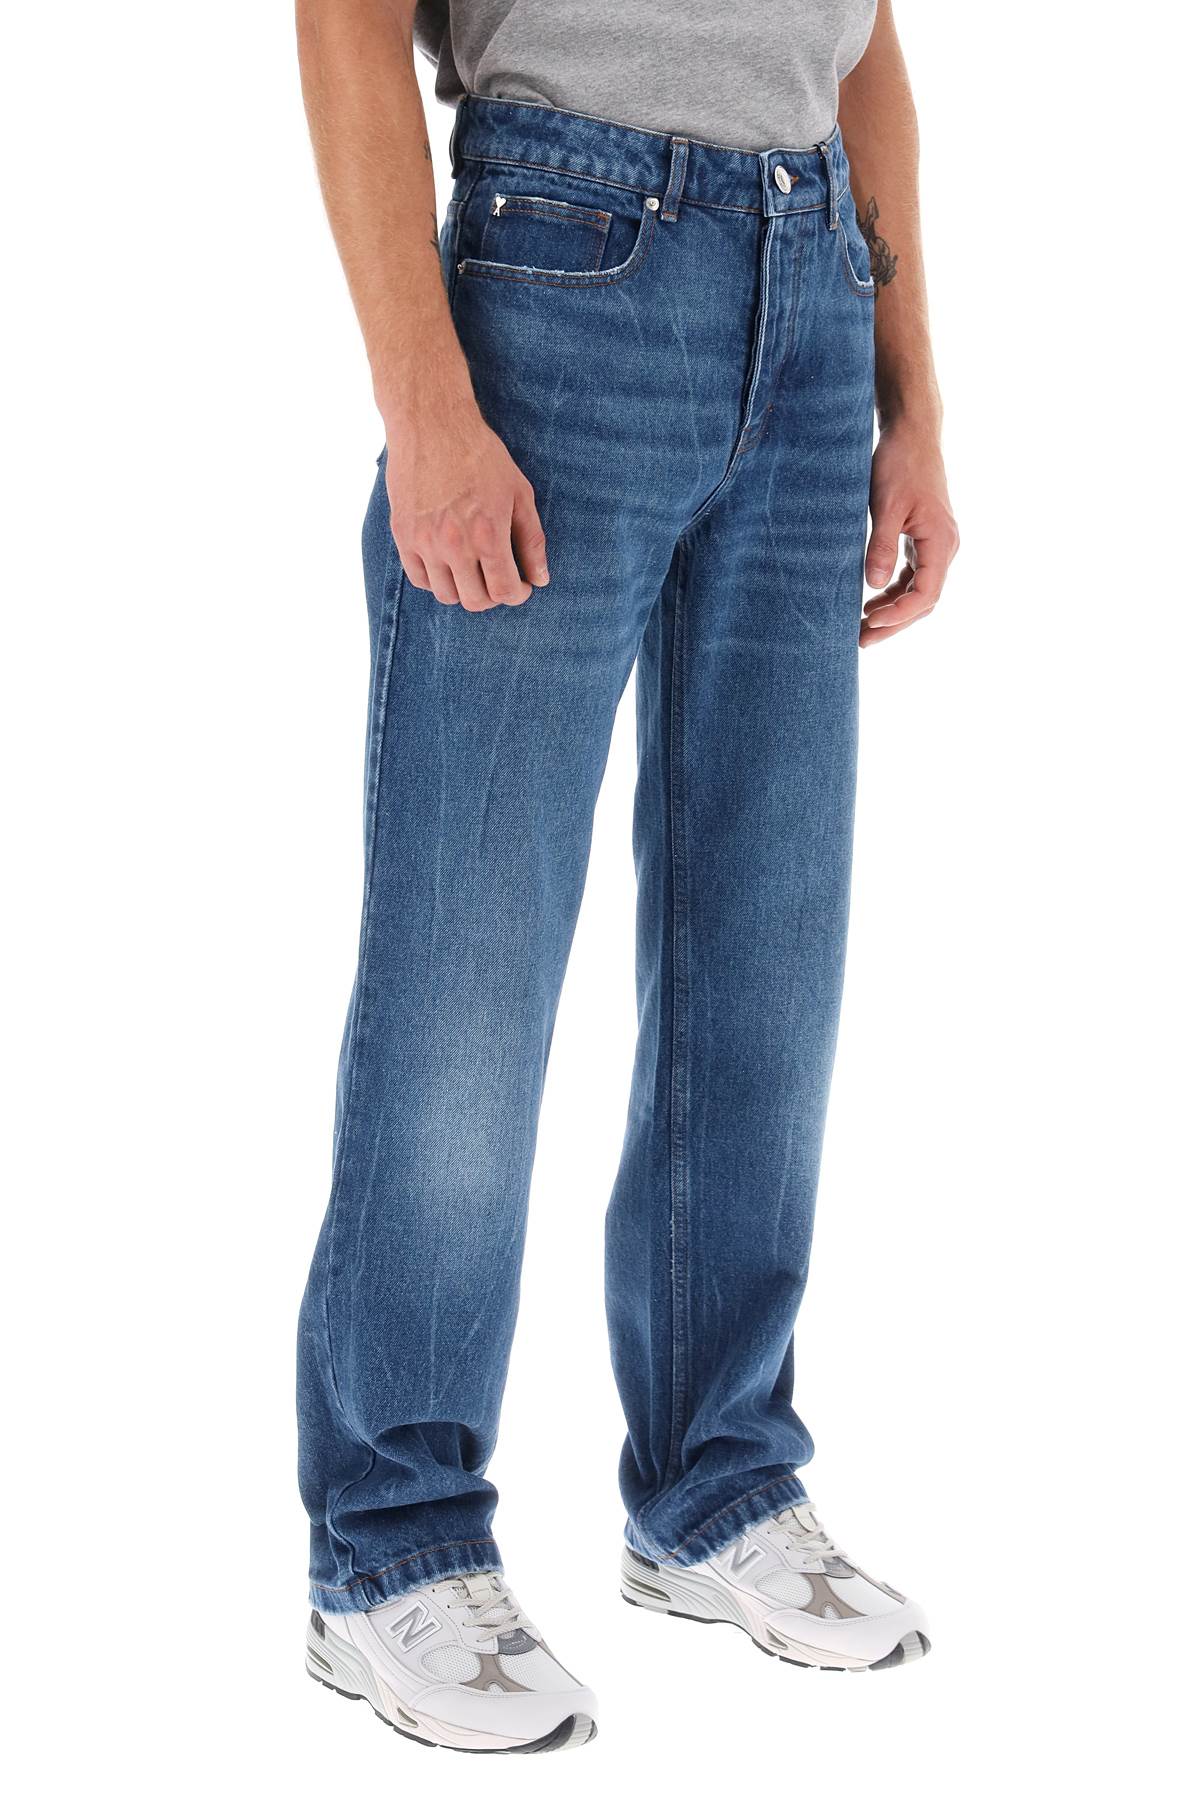 Ami paris loose jeans with straight cut-1